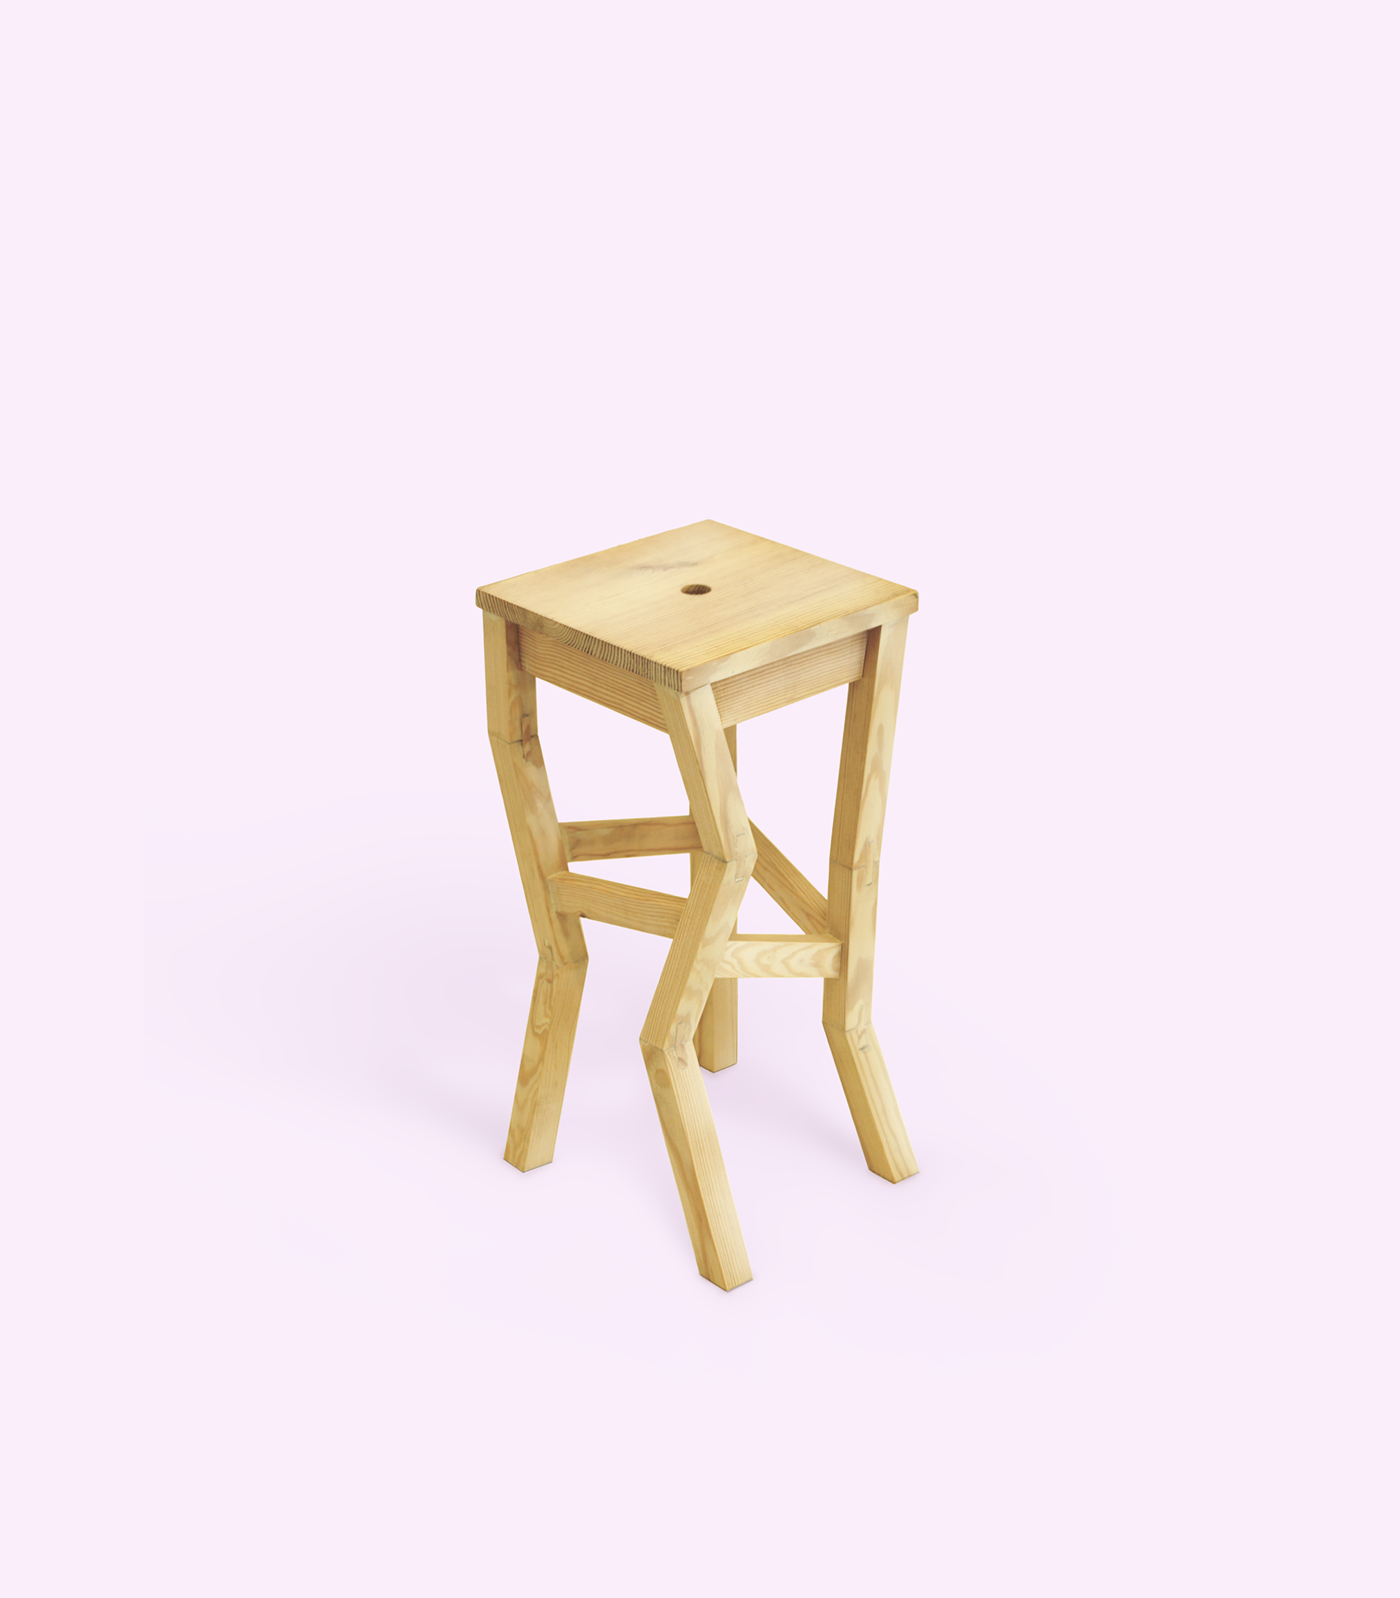 stool wood furniture product design  concept design pine design concept art product